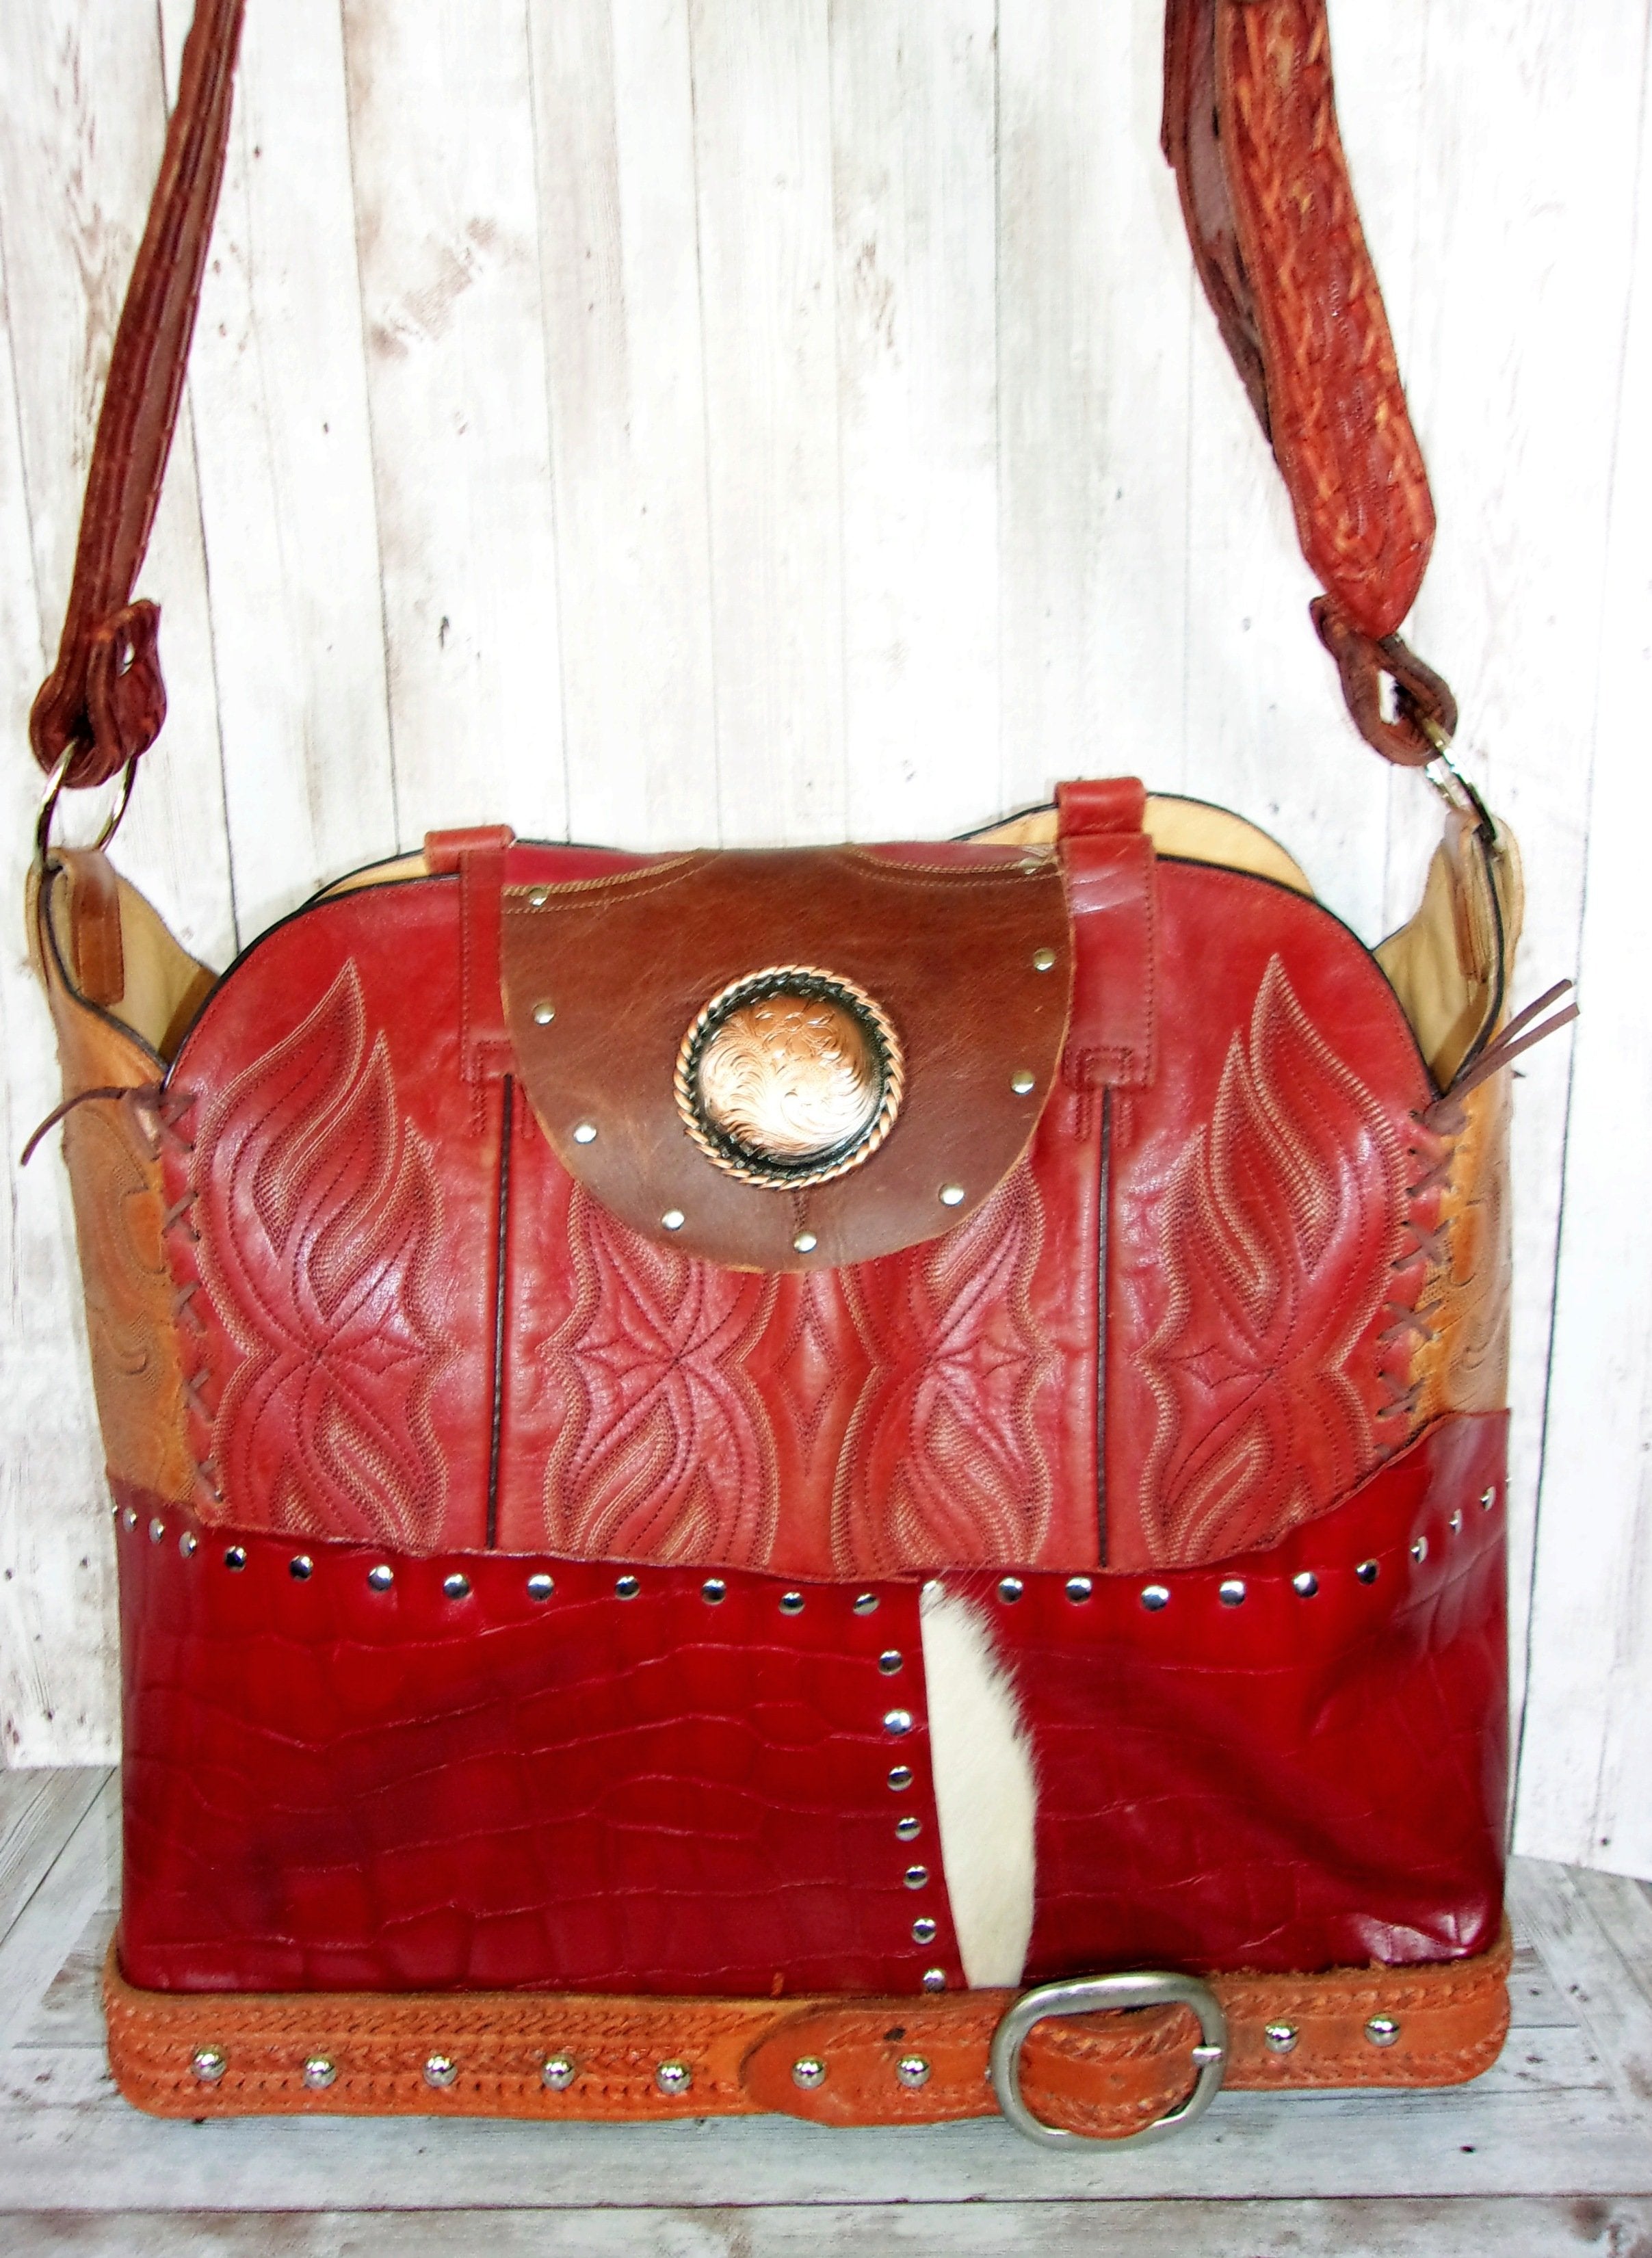 Western Laptop Tote - Extra Large Cowboy Boot Purse - Western Travel Bag LT32 cowboy boot purses, western fringe purse, handmade leather purses, boot purse, handmade western purse, custom leather handbags Chris Thompson Bags